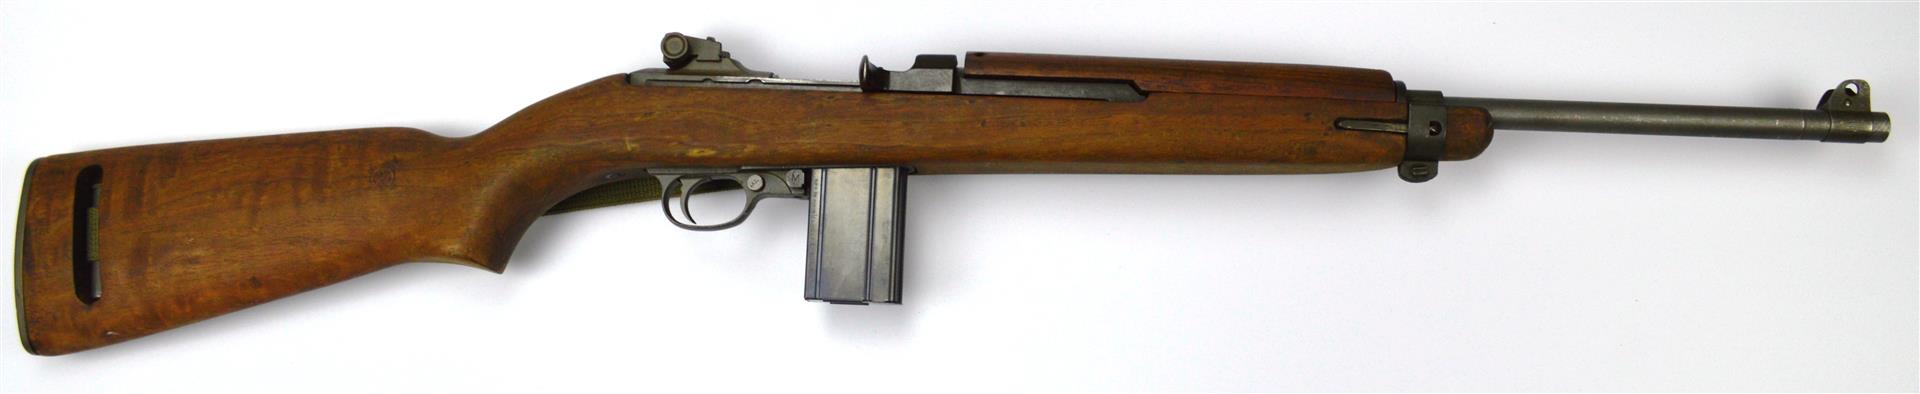 WWII US M1 Carbine Winchester